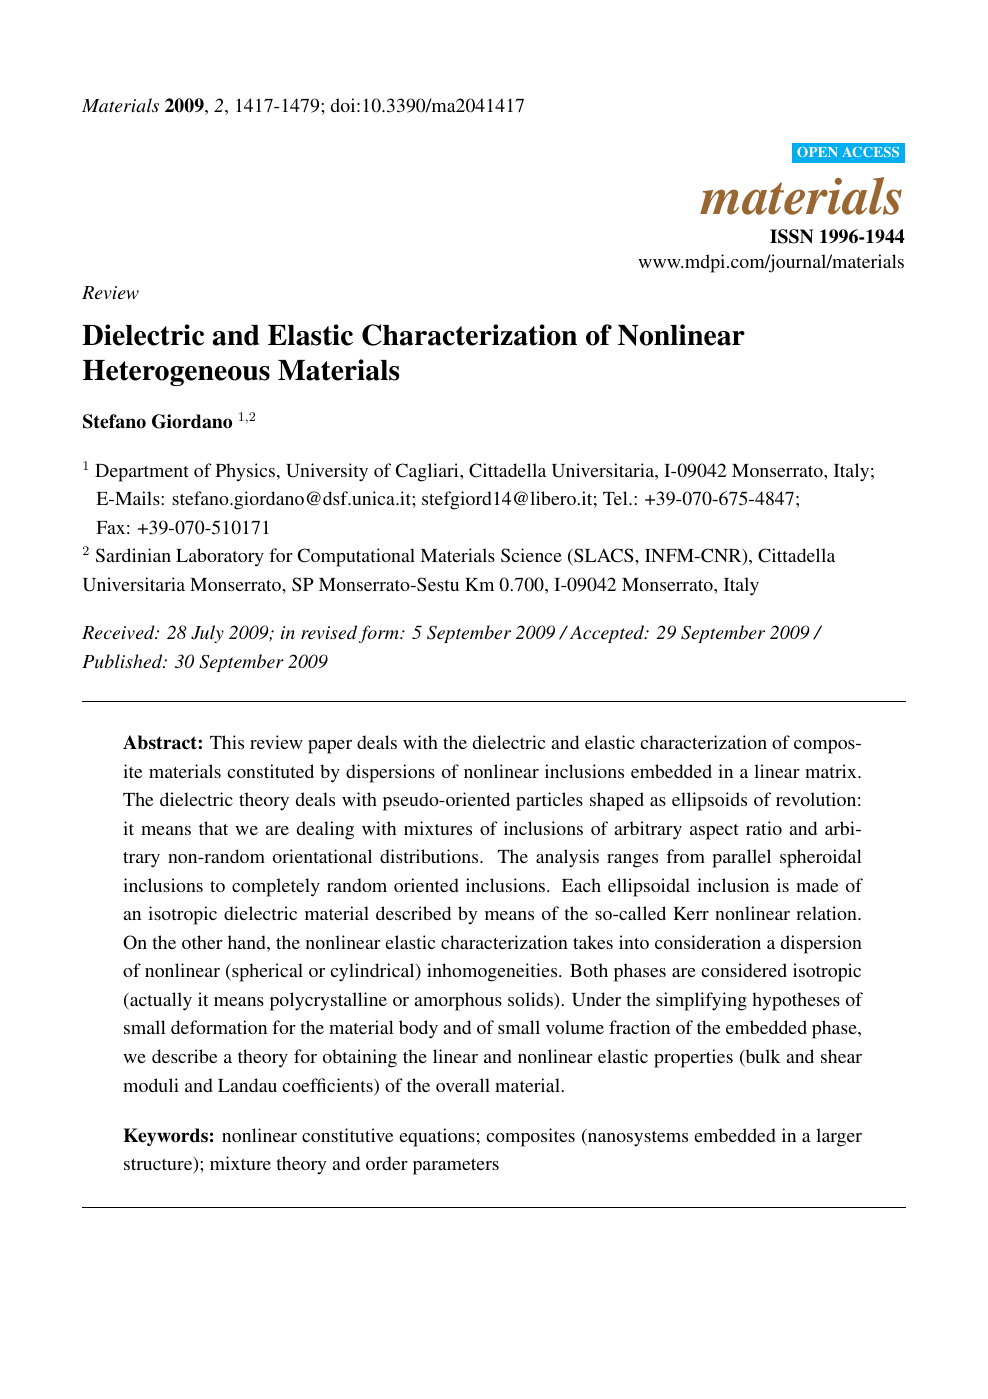 Dielectric And Elastic Characterization Of Nonlinear Heterogeneous Materials Topic Of Research Paper In Mathematics Download Scholarly Article Pdf And Read For Free On Cyberleninka Open Science Hub